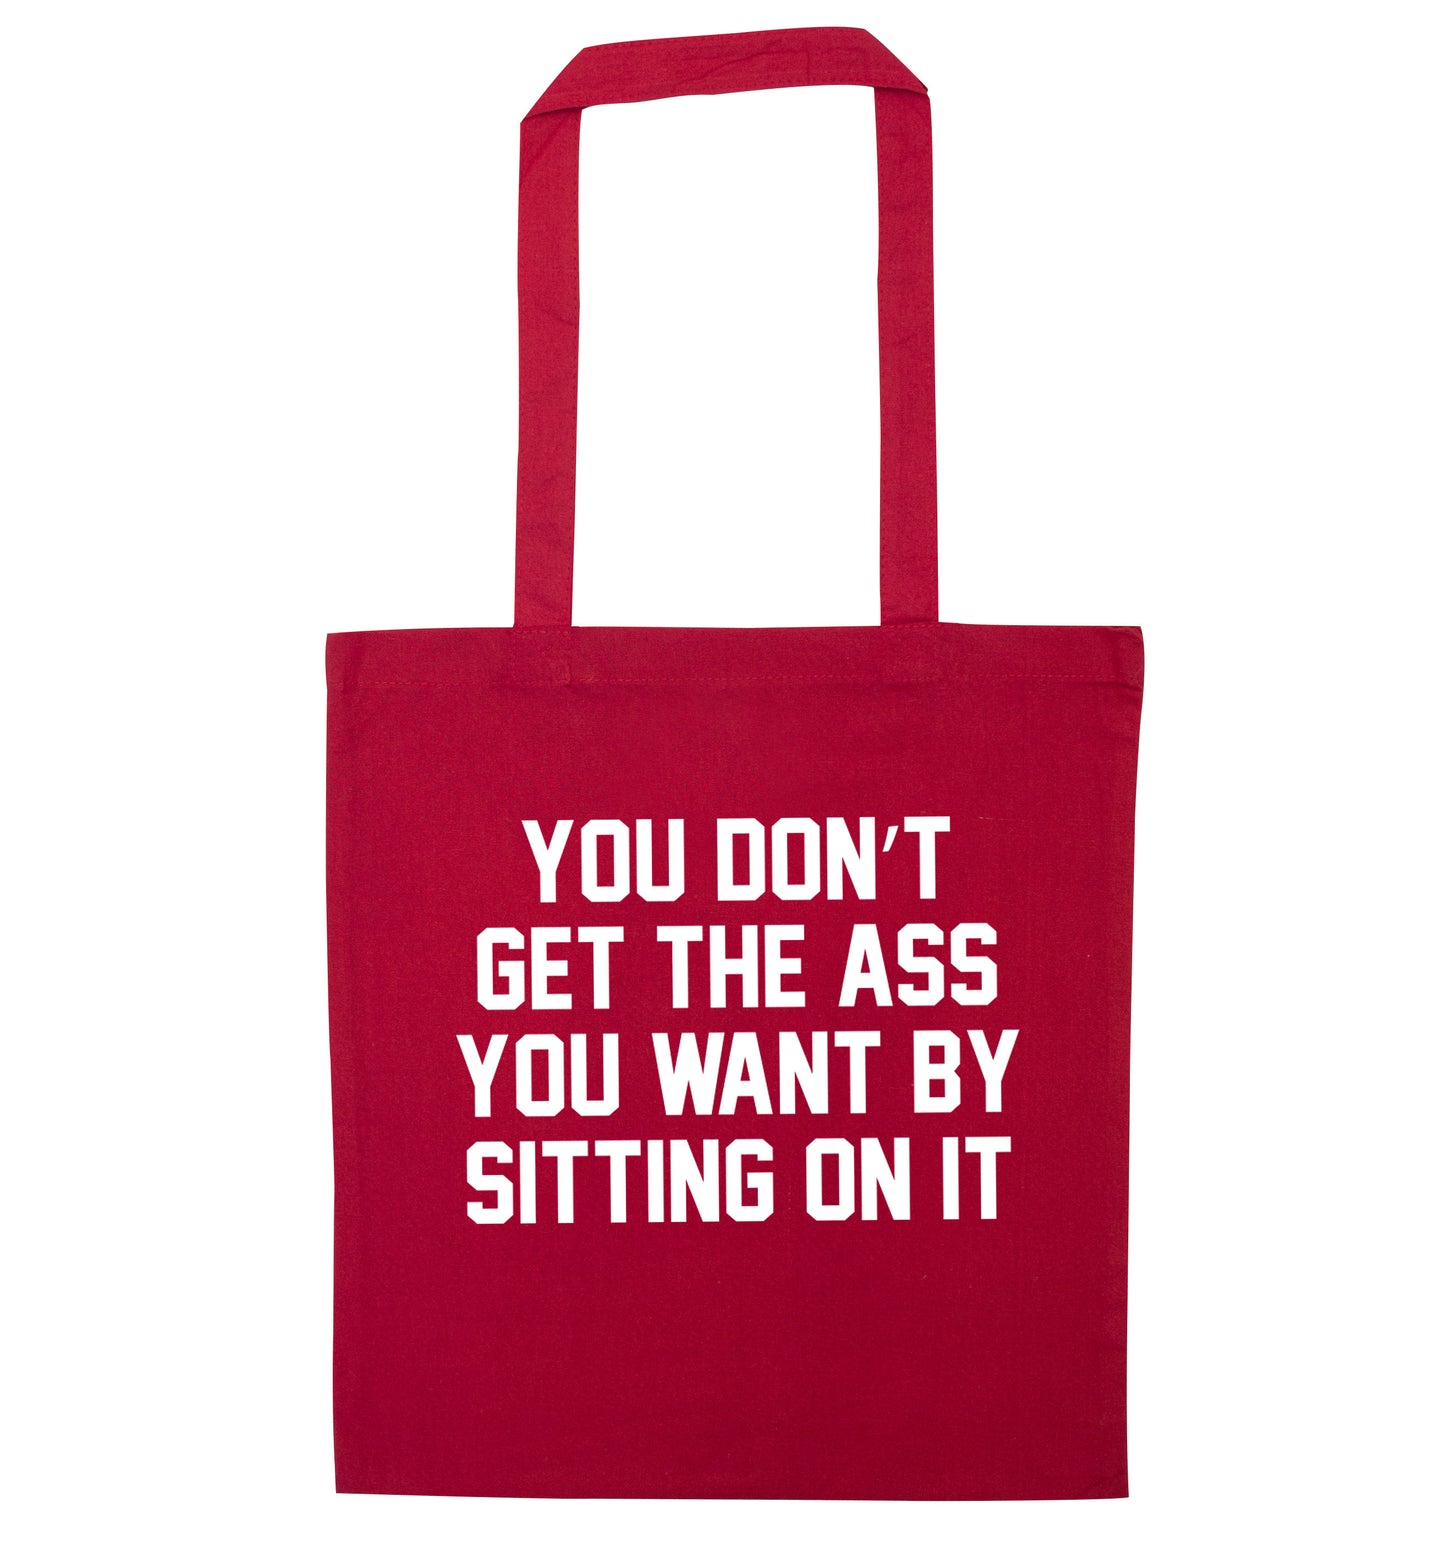 You don't get the ass you want by sitting on it red tote bag